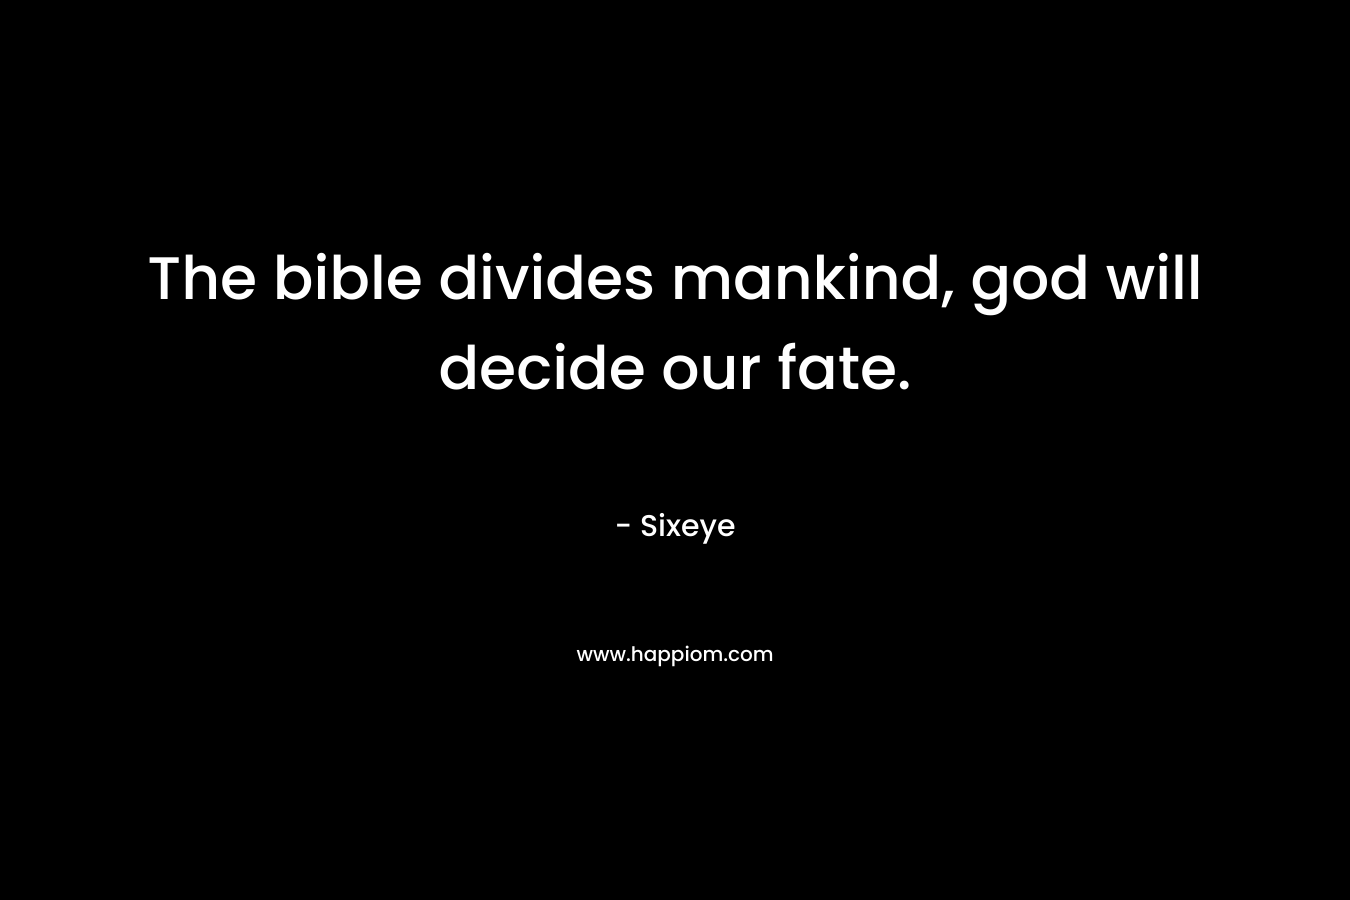 The bible divides mankind, god will decide our fate. – Sixeye